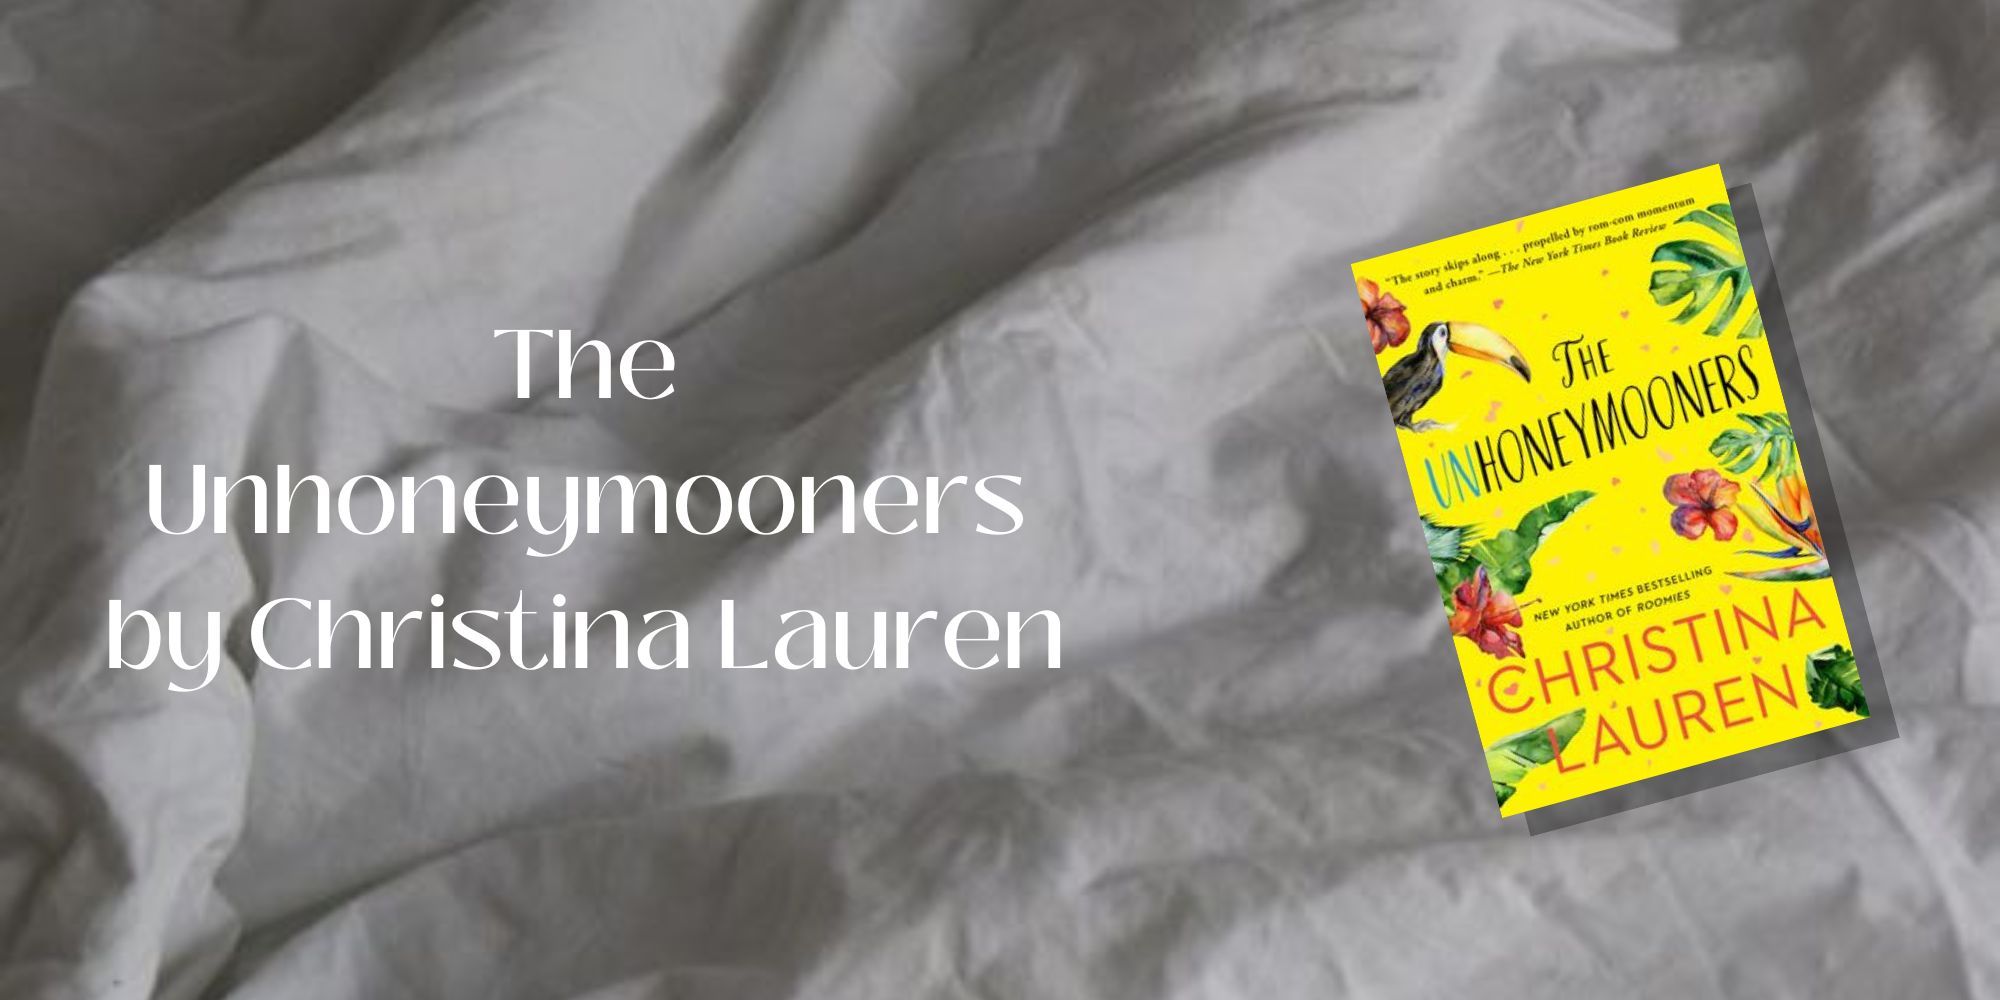 A paperback of The Unhoneymooners by Christina Lauren